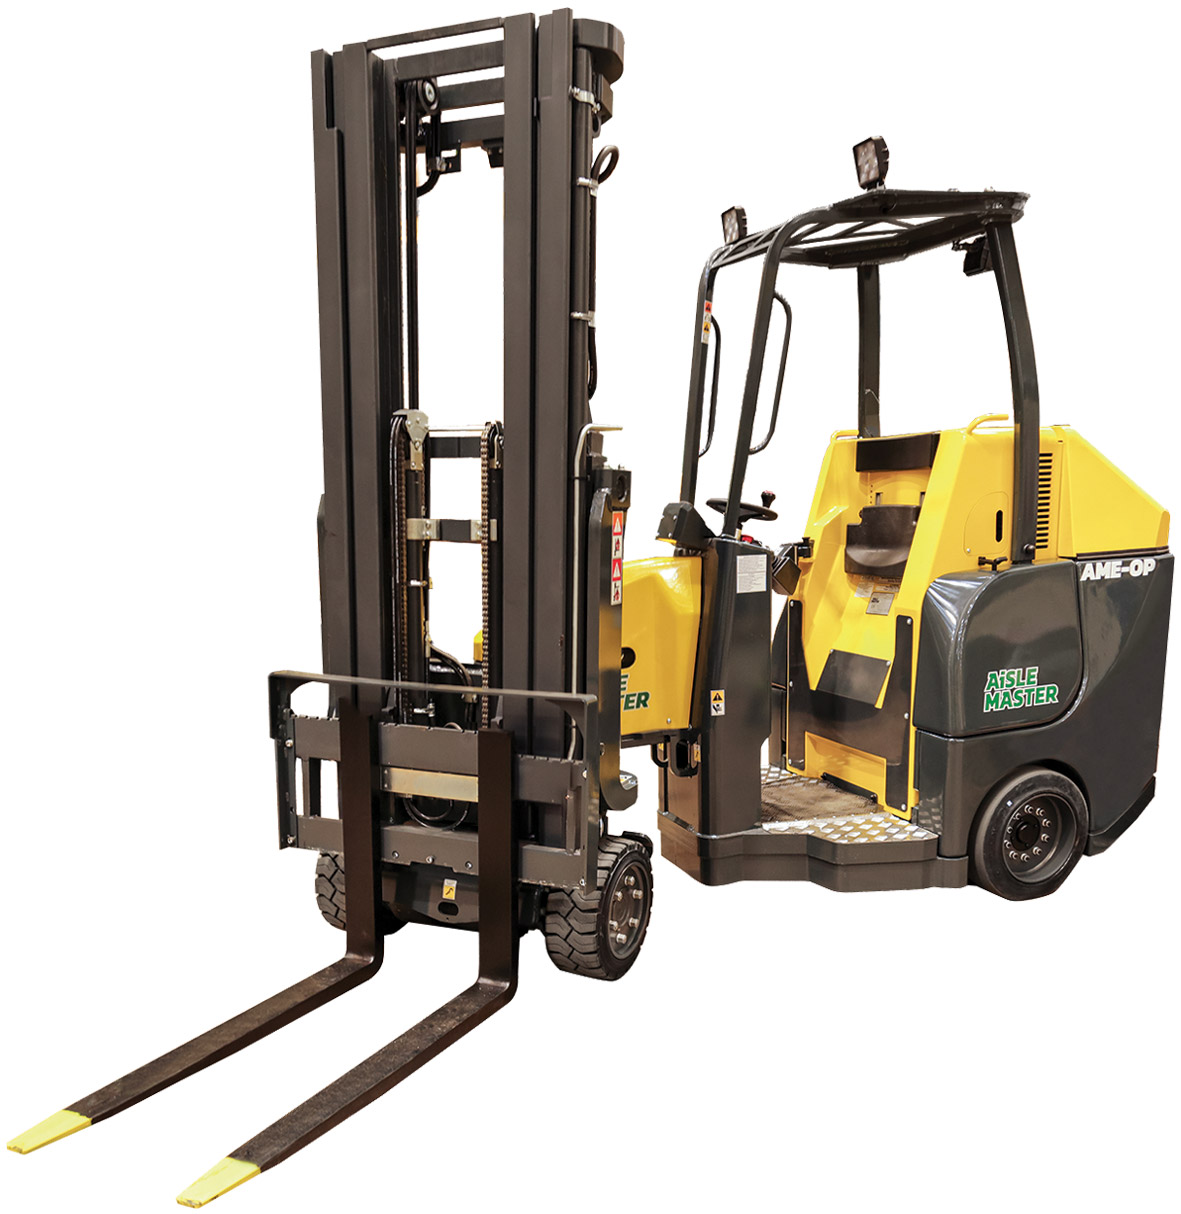 Aisle Master-OP electric-powered forklift